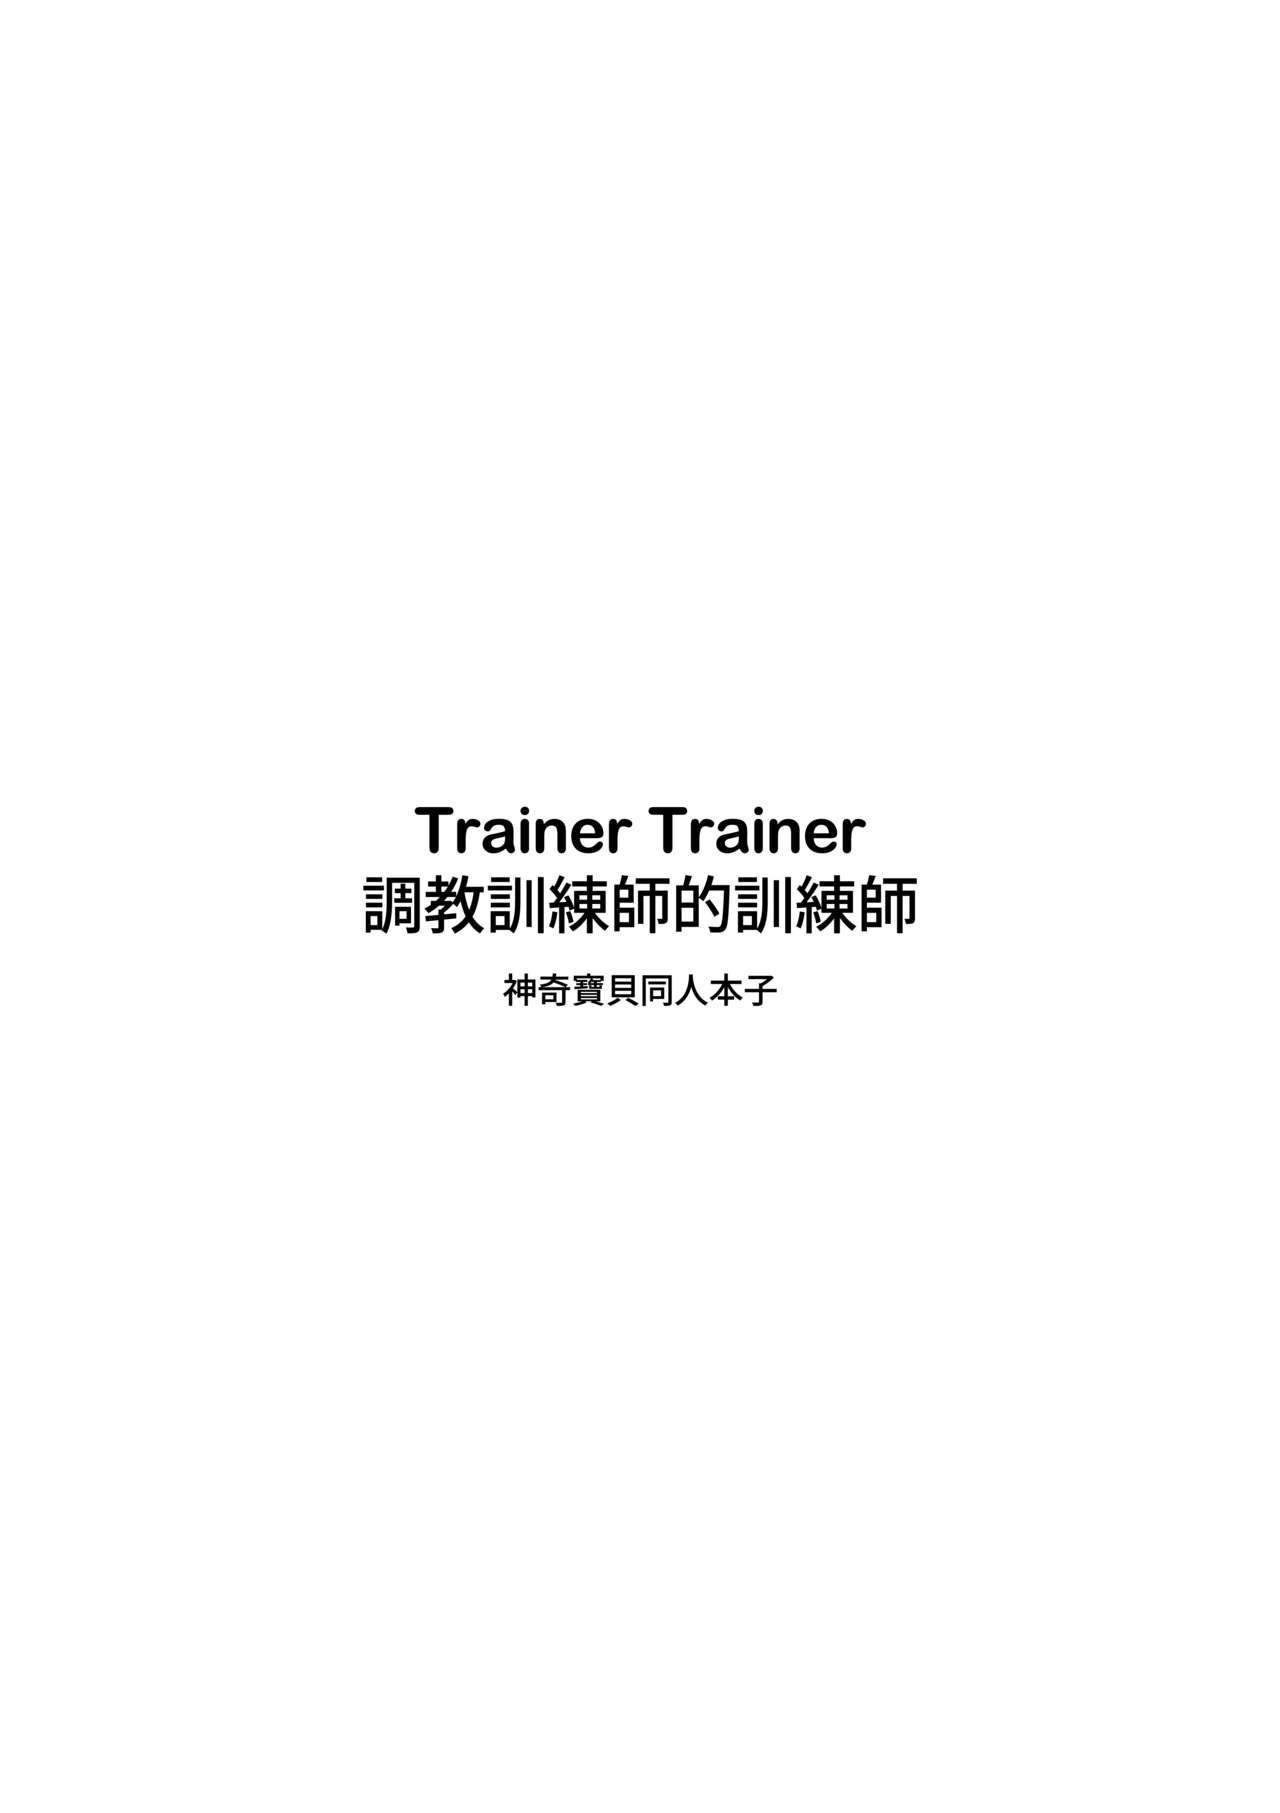 Facebook Trainer Trainer - Pokemon Doggy Style Porn - Page 3